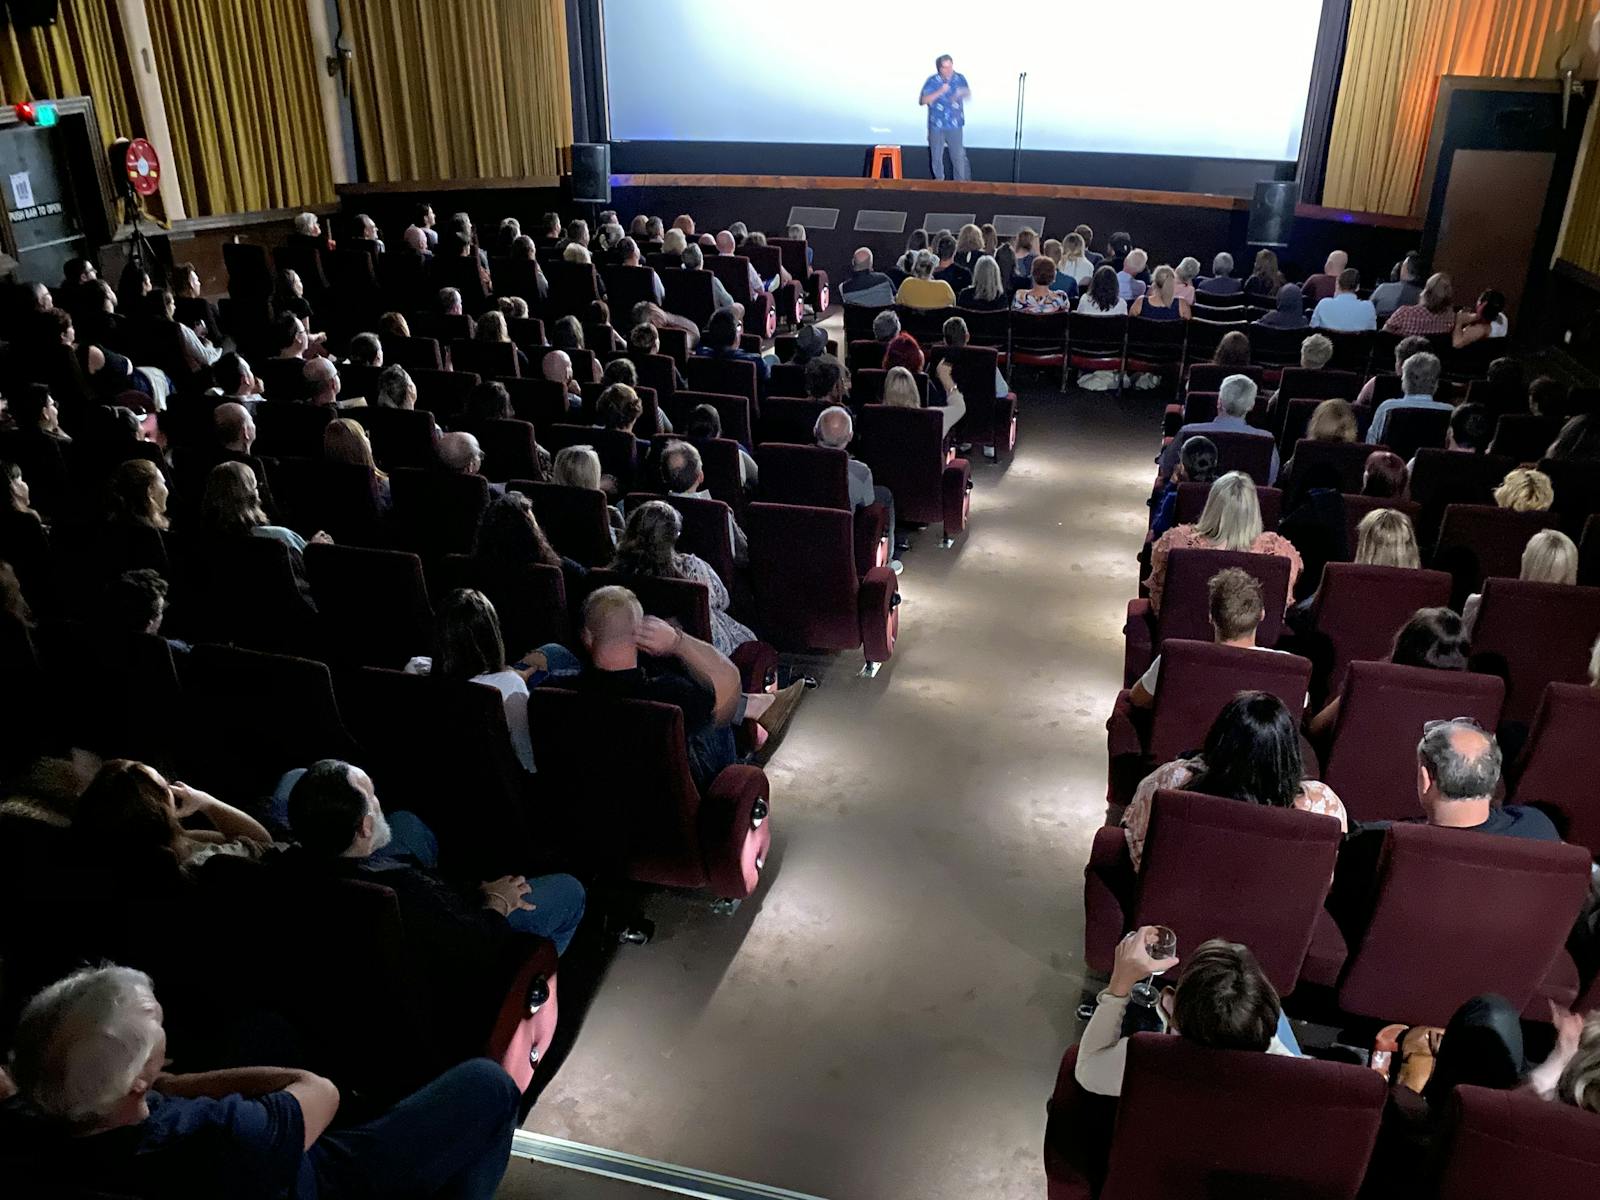 Image for Live Comedy at Cameo Cinema